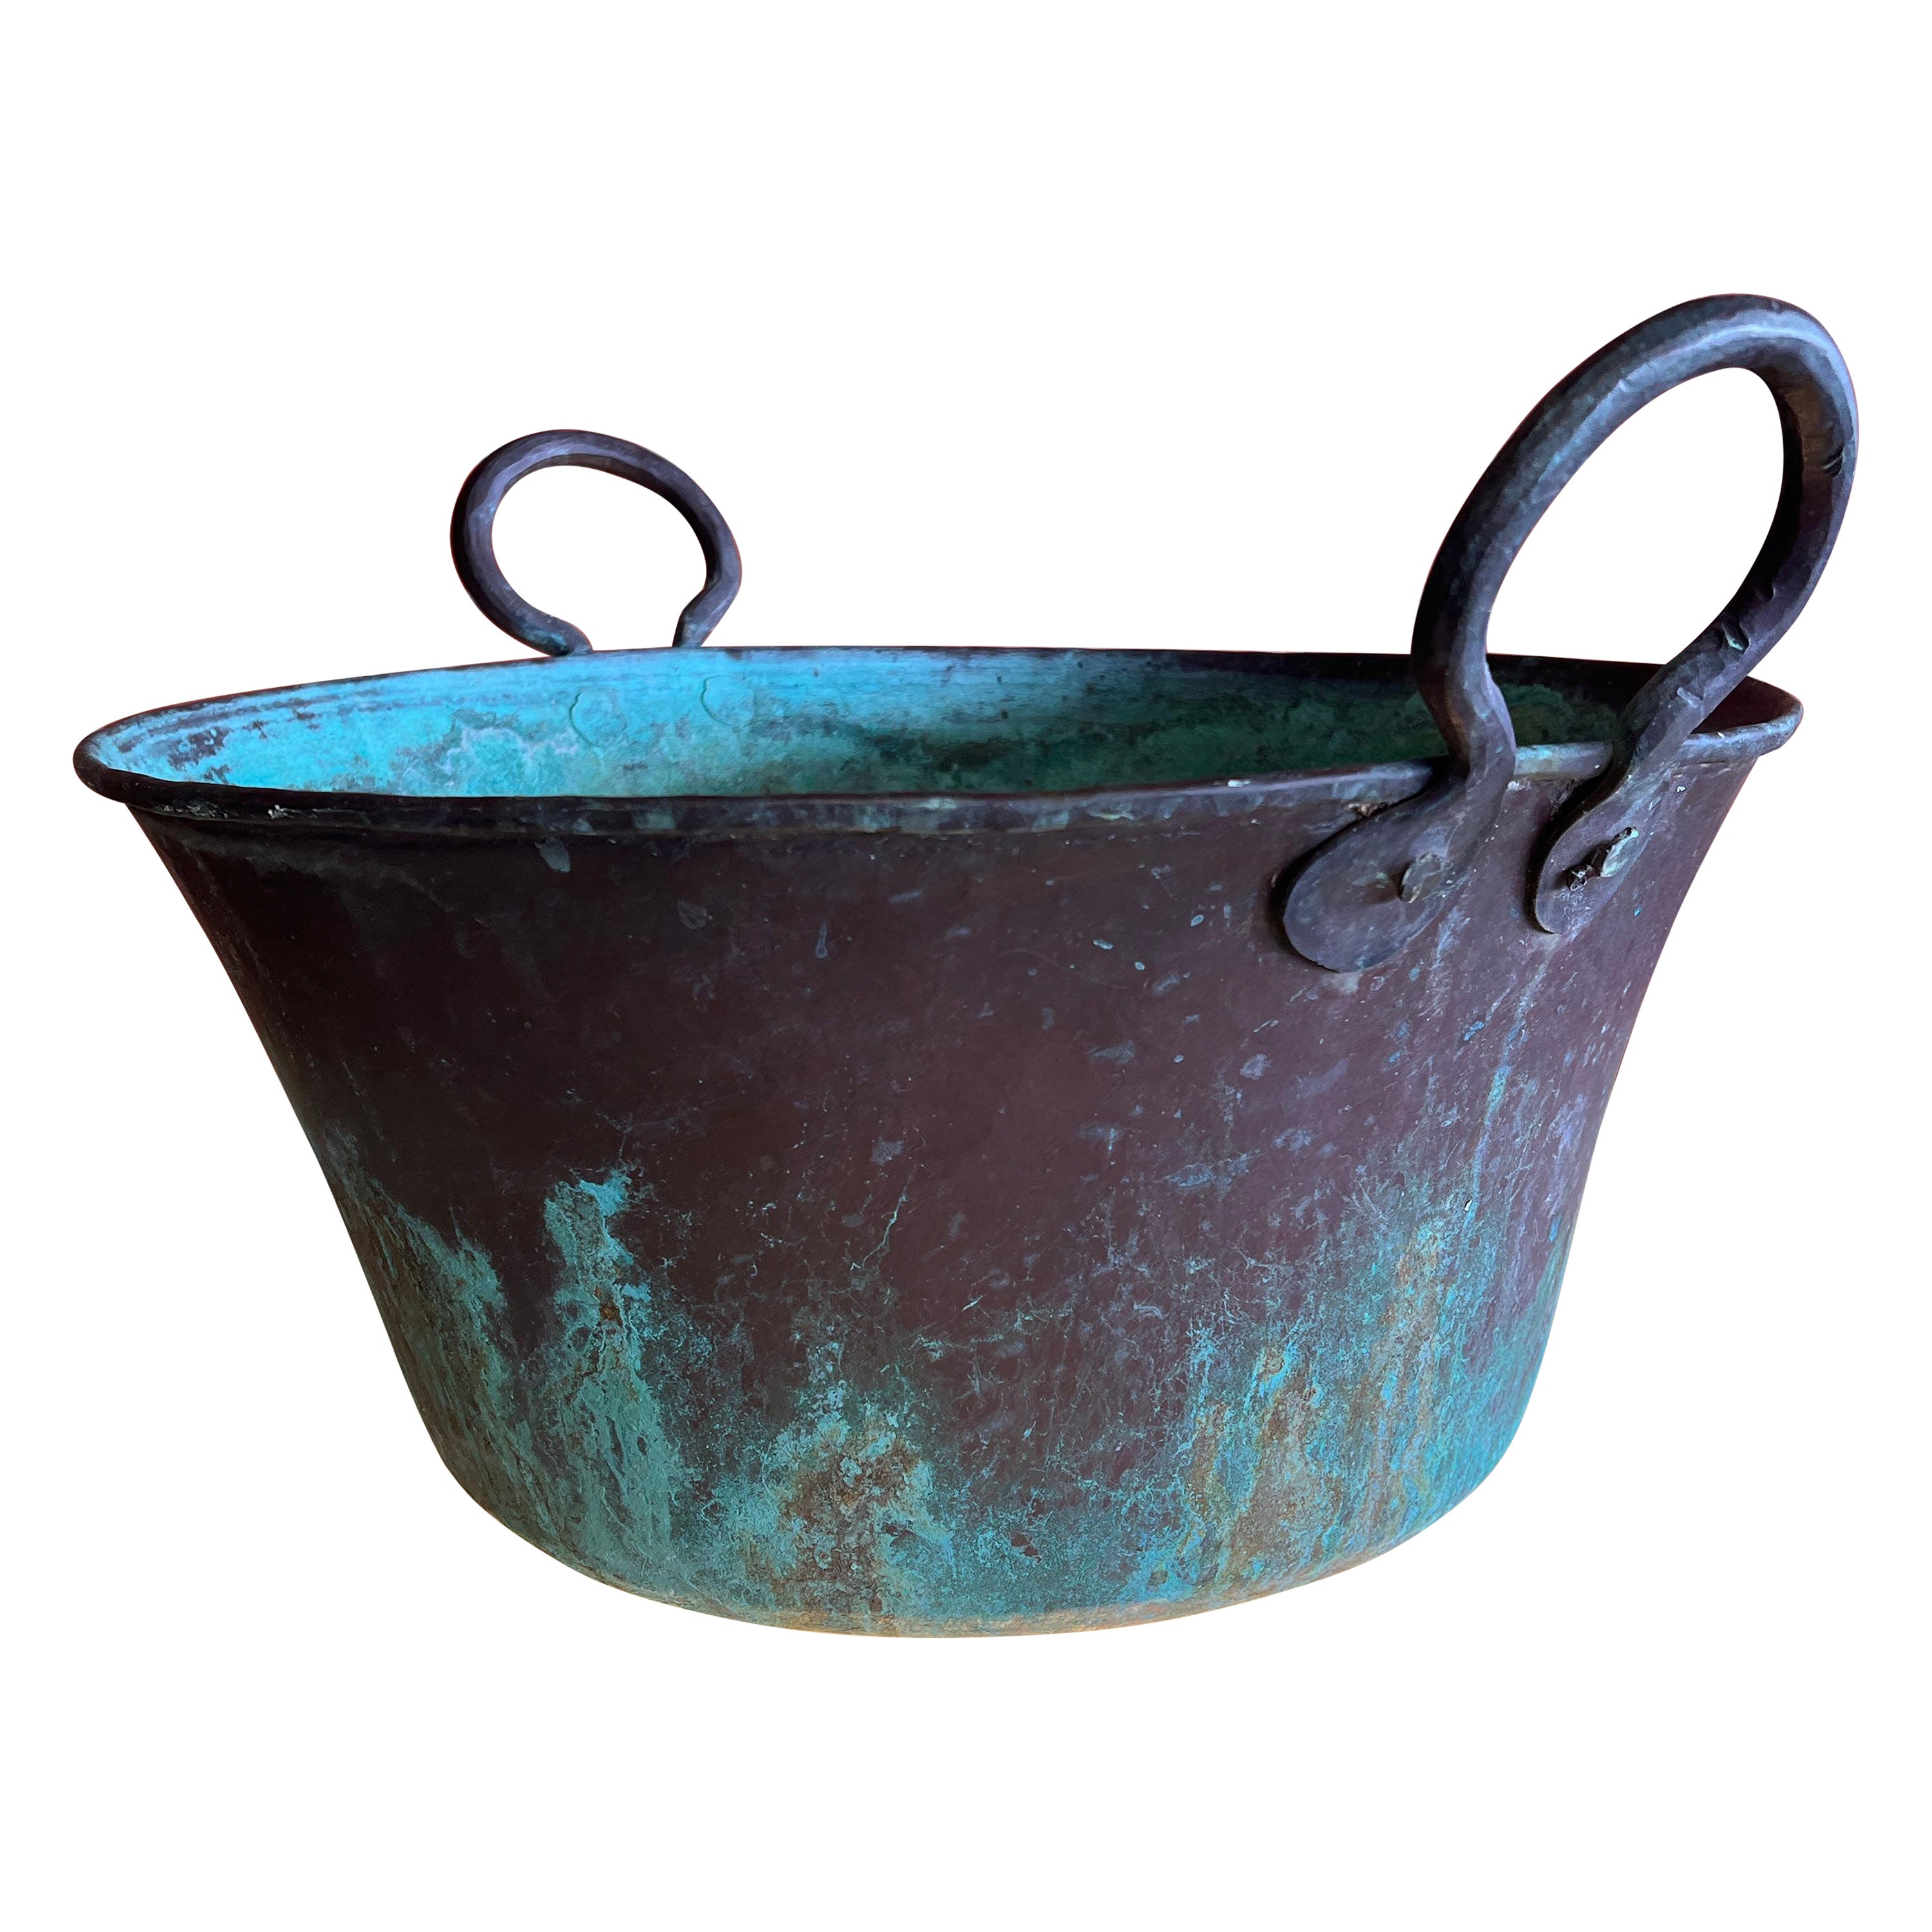 Is it safe to cook in old copper pots?